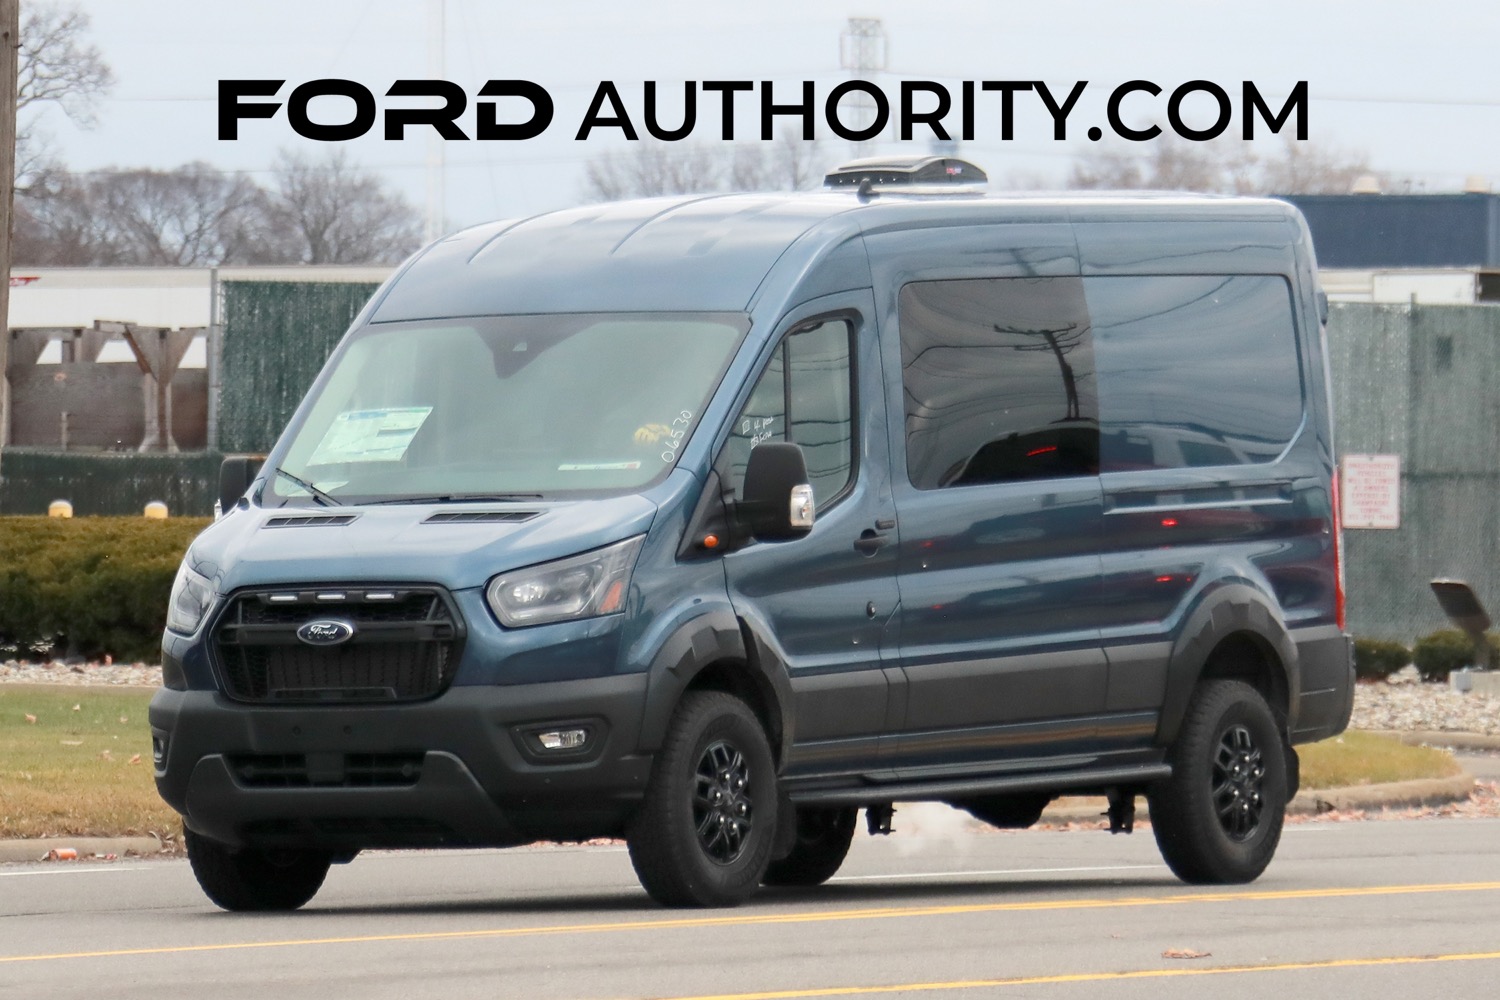 https://fordauthority.com/wp-content/gallery/2023-ford-transit-trail/2023-ford-transit-trail-350-blue-metallic-ft-medium-roof-side-door-glass-and-rear-cargo-door-glass-first-real-world-photos-exterior-001.jpg